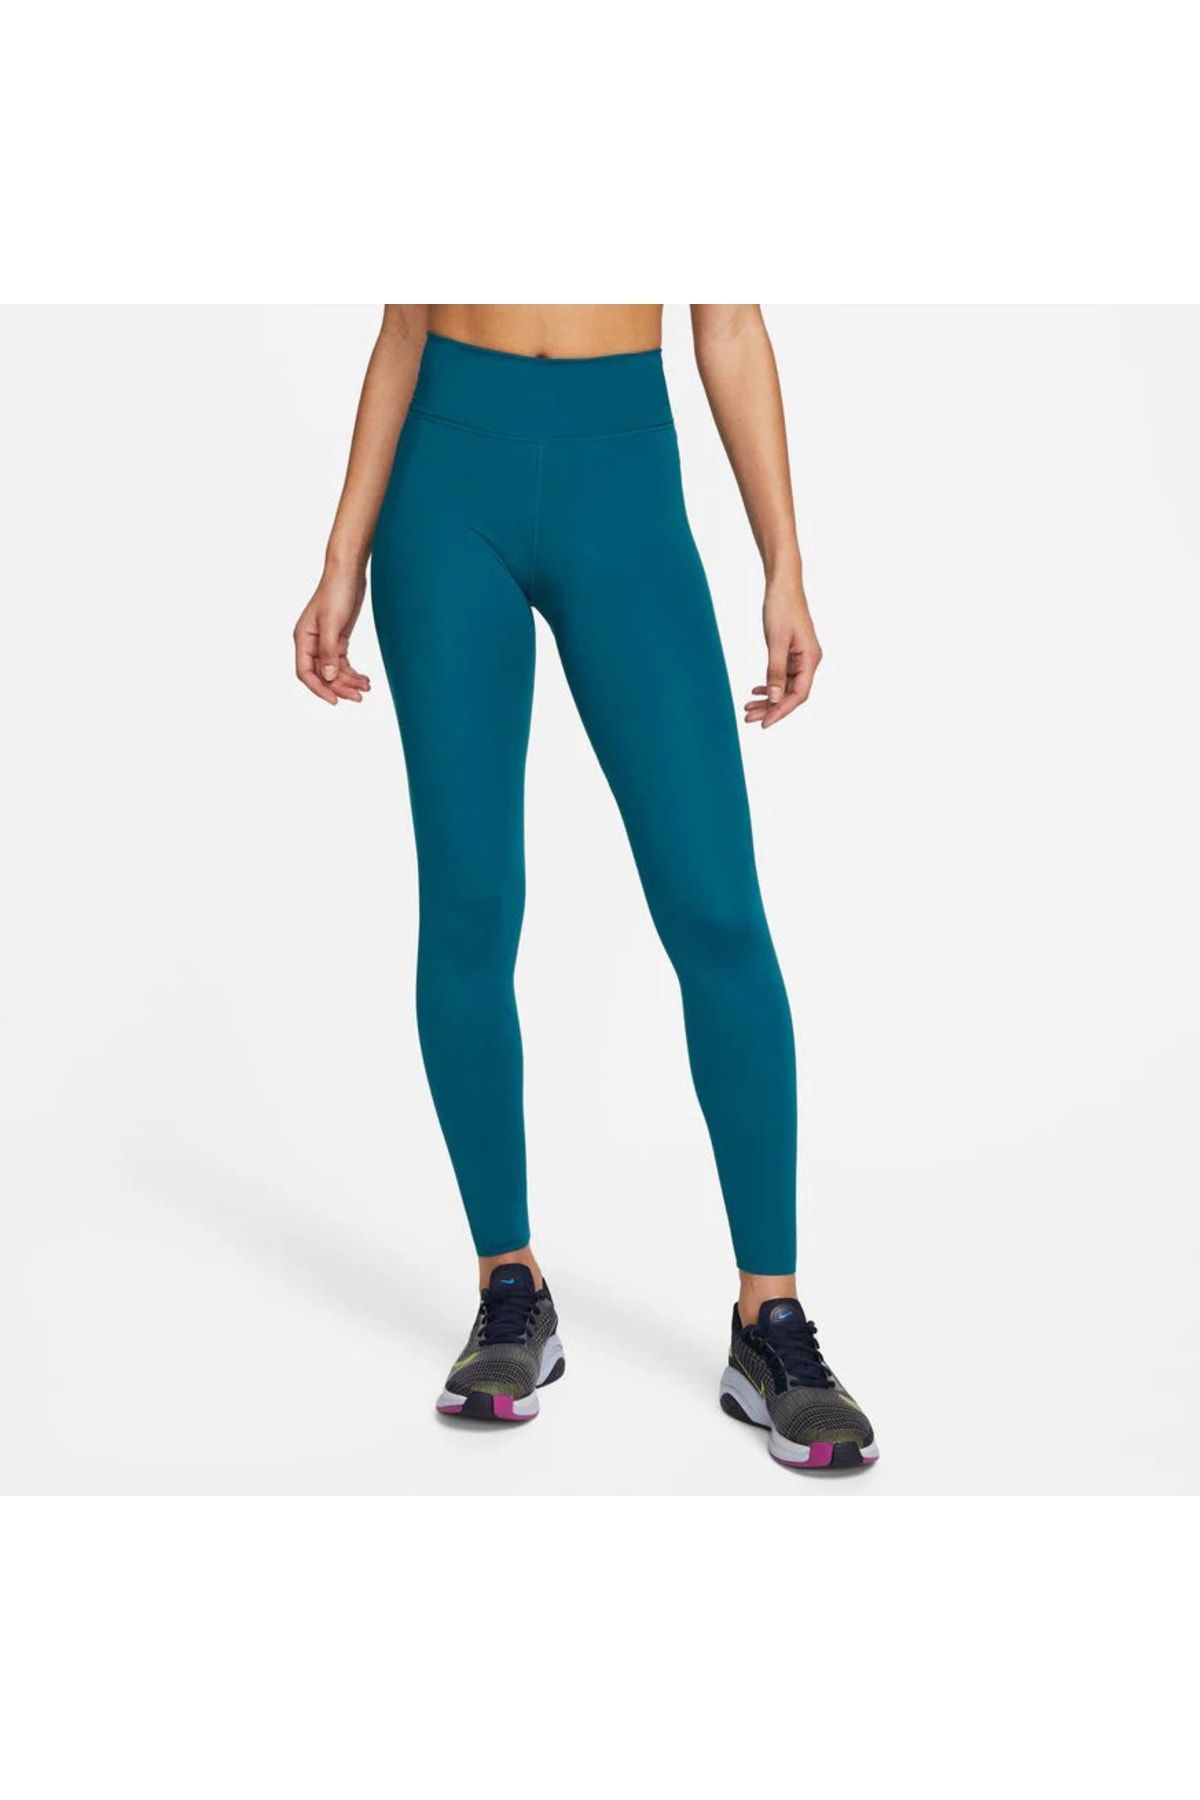 Nike WMNS One Luxe leggings 010 AT3098-010, Sportswear, Official archives  of Merkandi